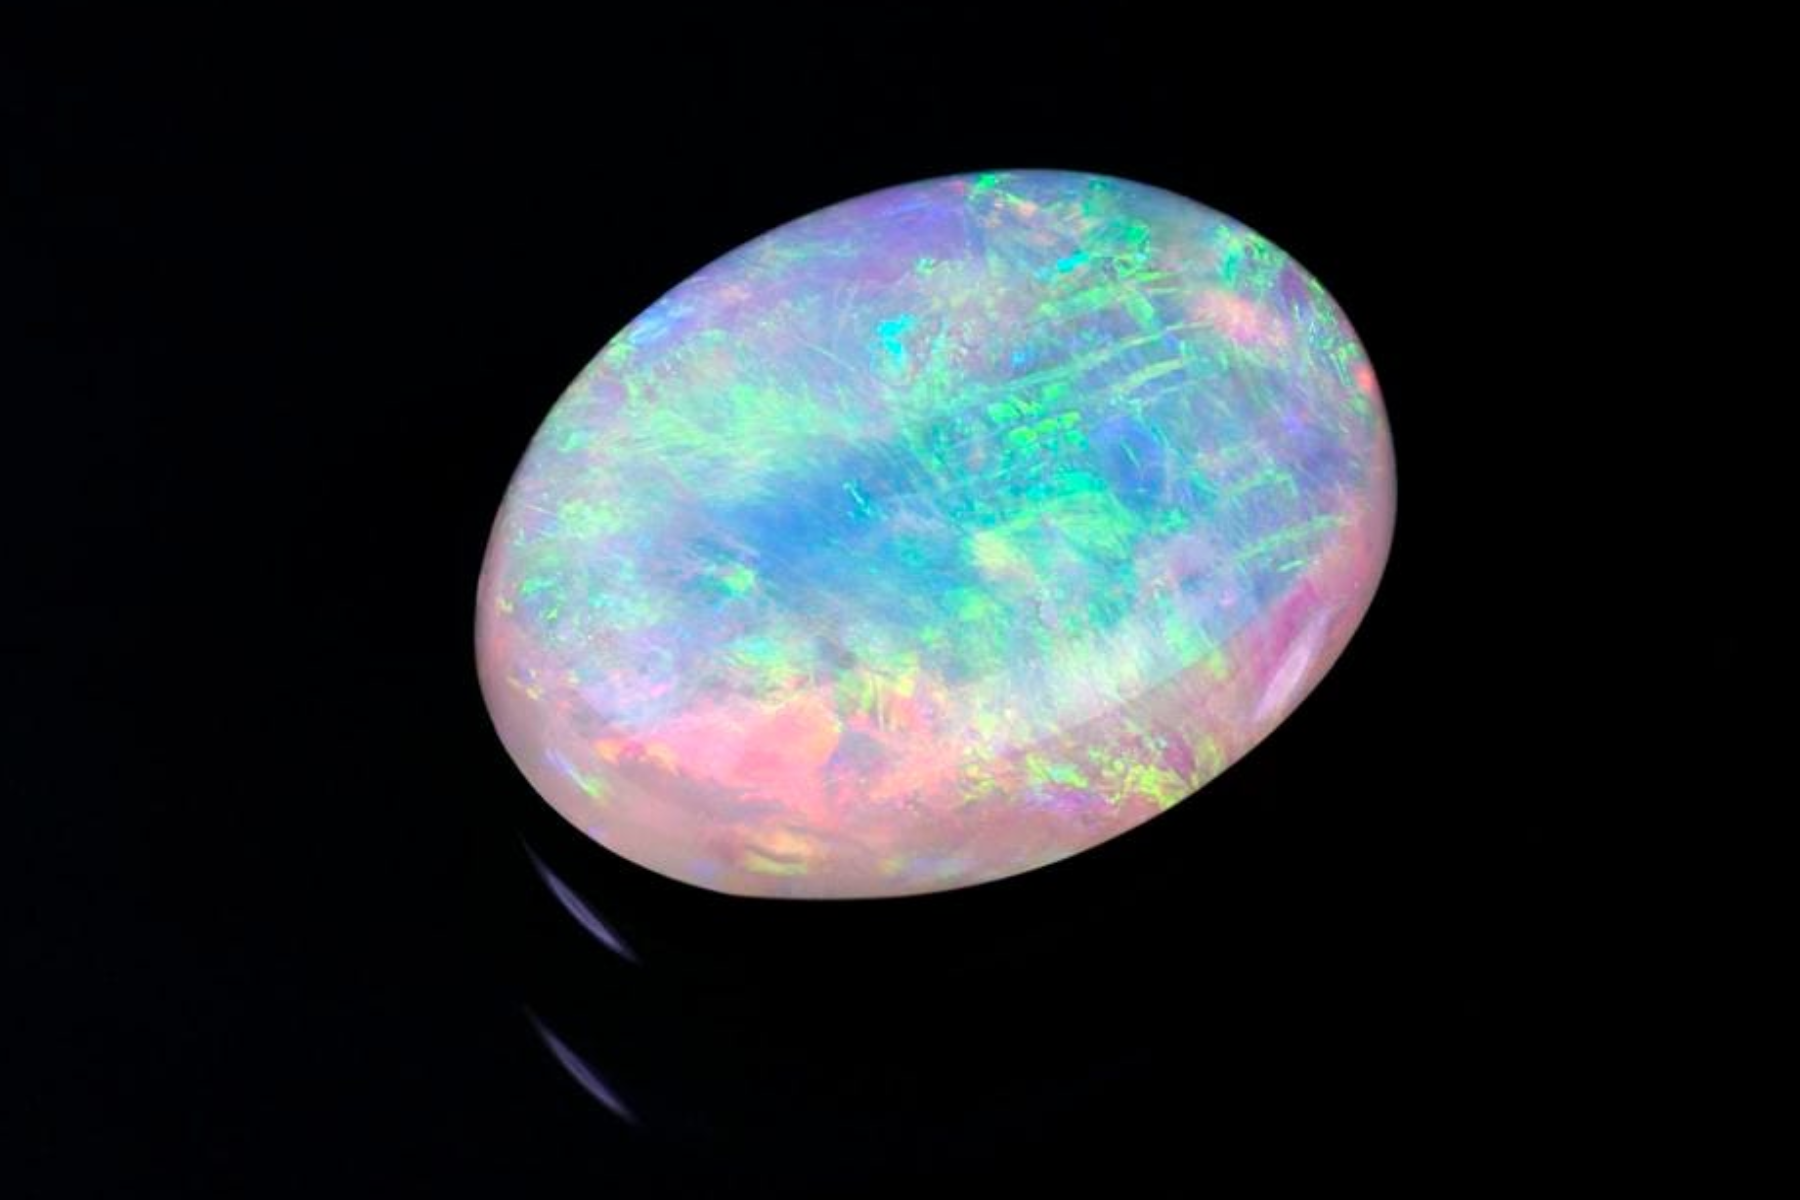 Opal stone placed on a dark background